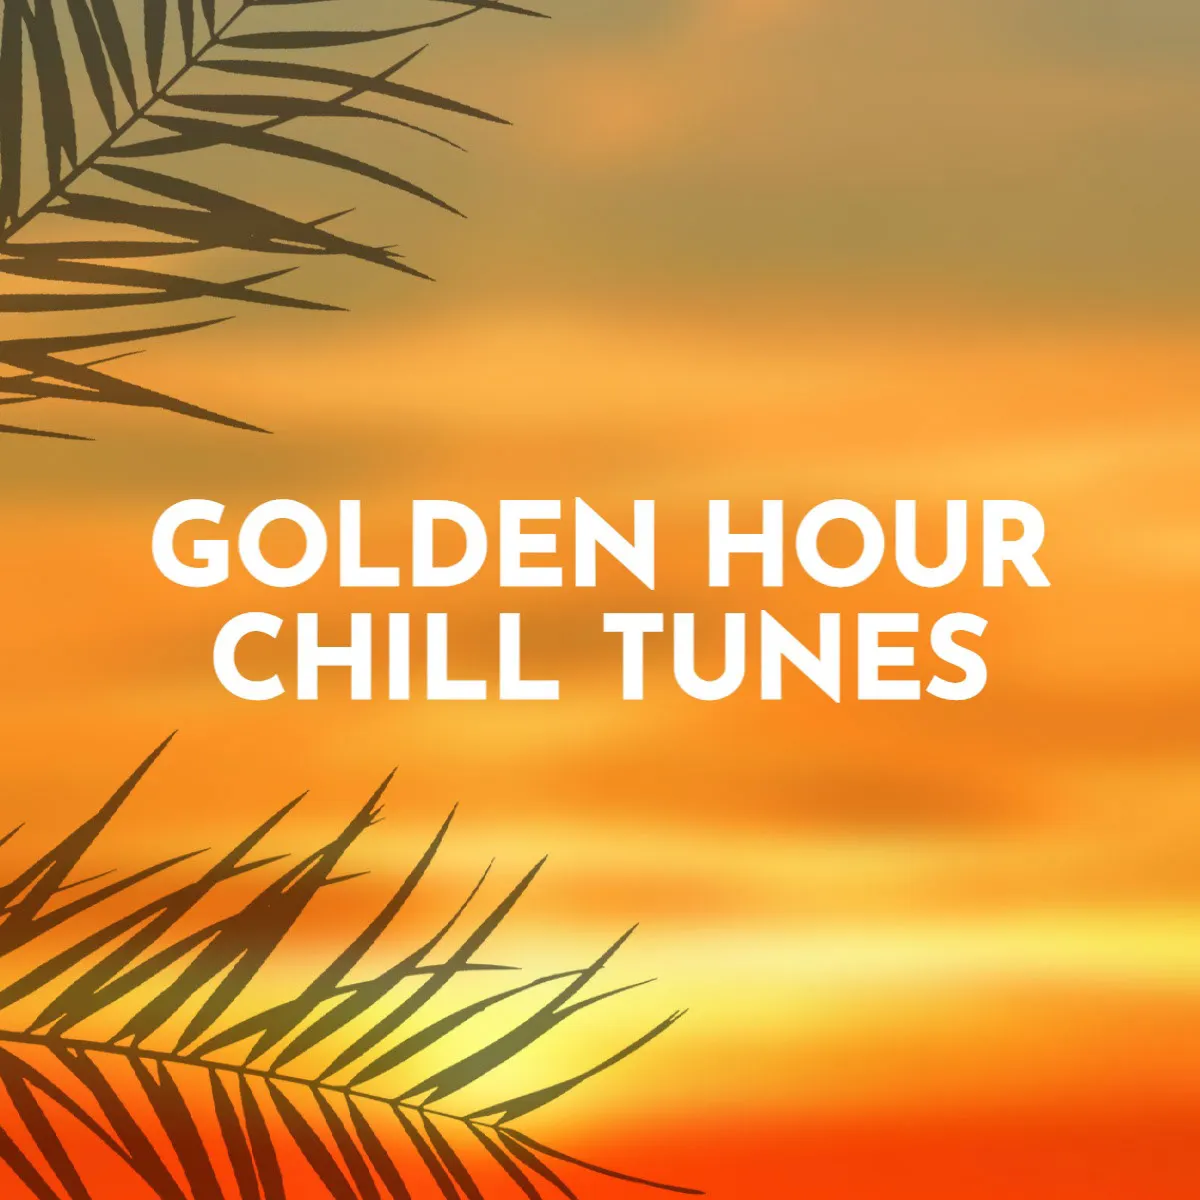 White Golden Hour Chill Tunes Mixtape Cover